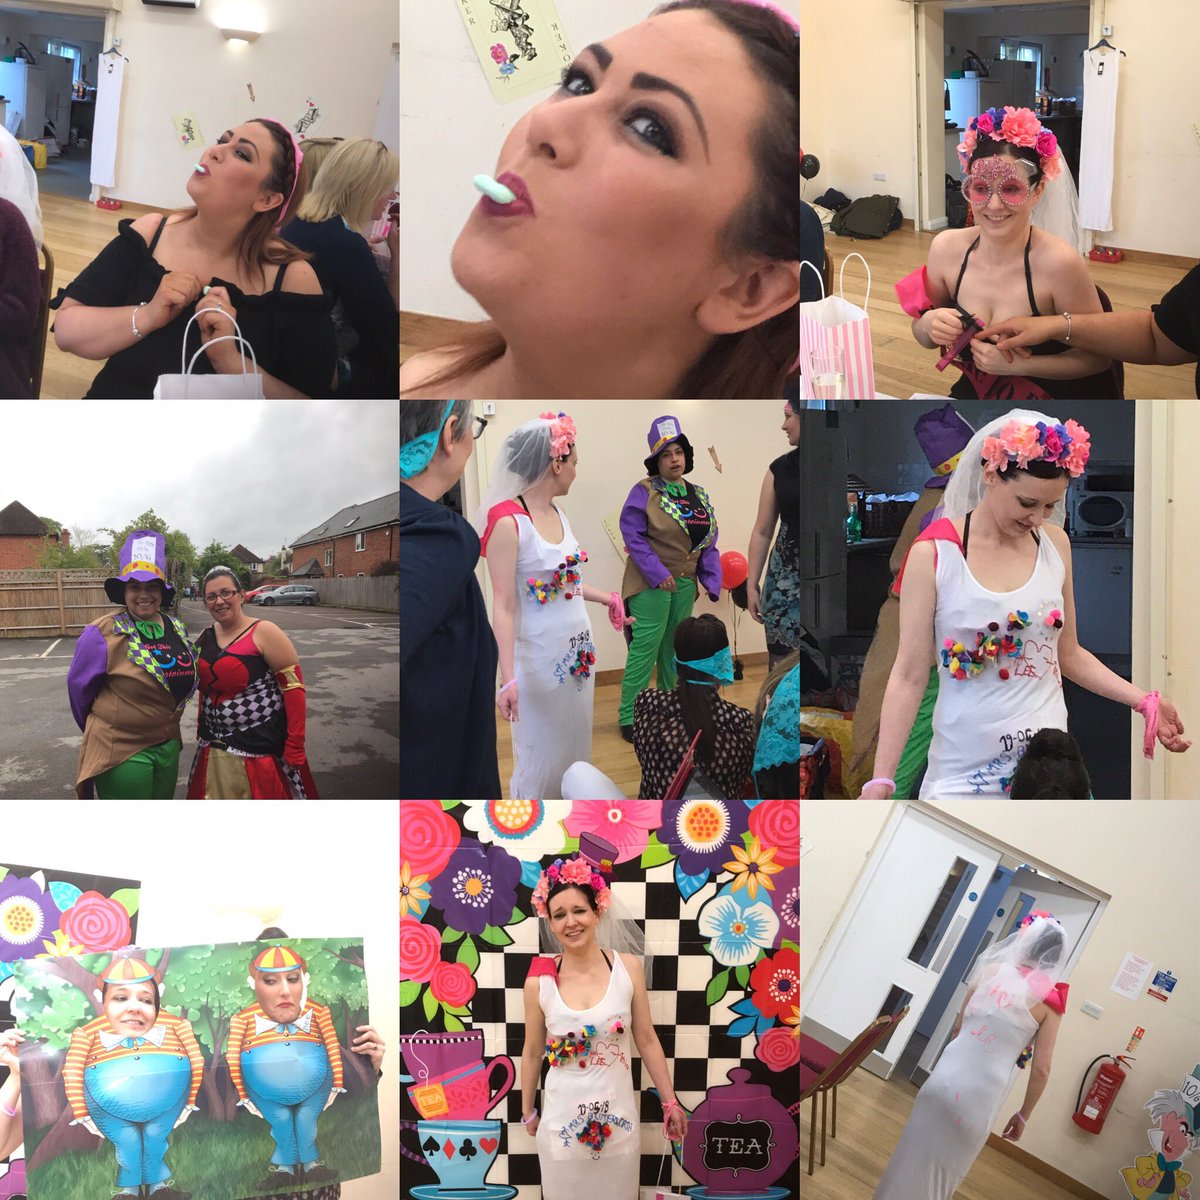 Great event with happy clients... for your booking quote contact us got-this-entertainment.co.uk #event #party #henparty #afternoontea #themed #aliceinwonderland #cocktails #prosecco #lifedrawing #madhatter #queenofhearts #smallbusiness #womeninbusiness #hosting #eventcoordinators